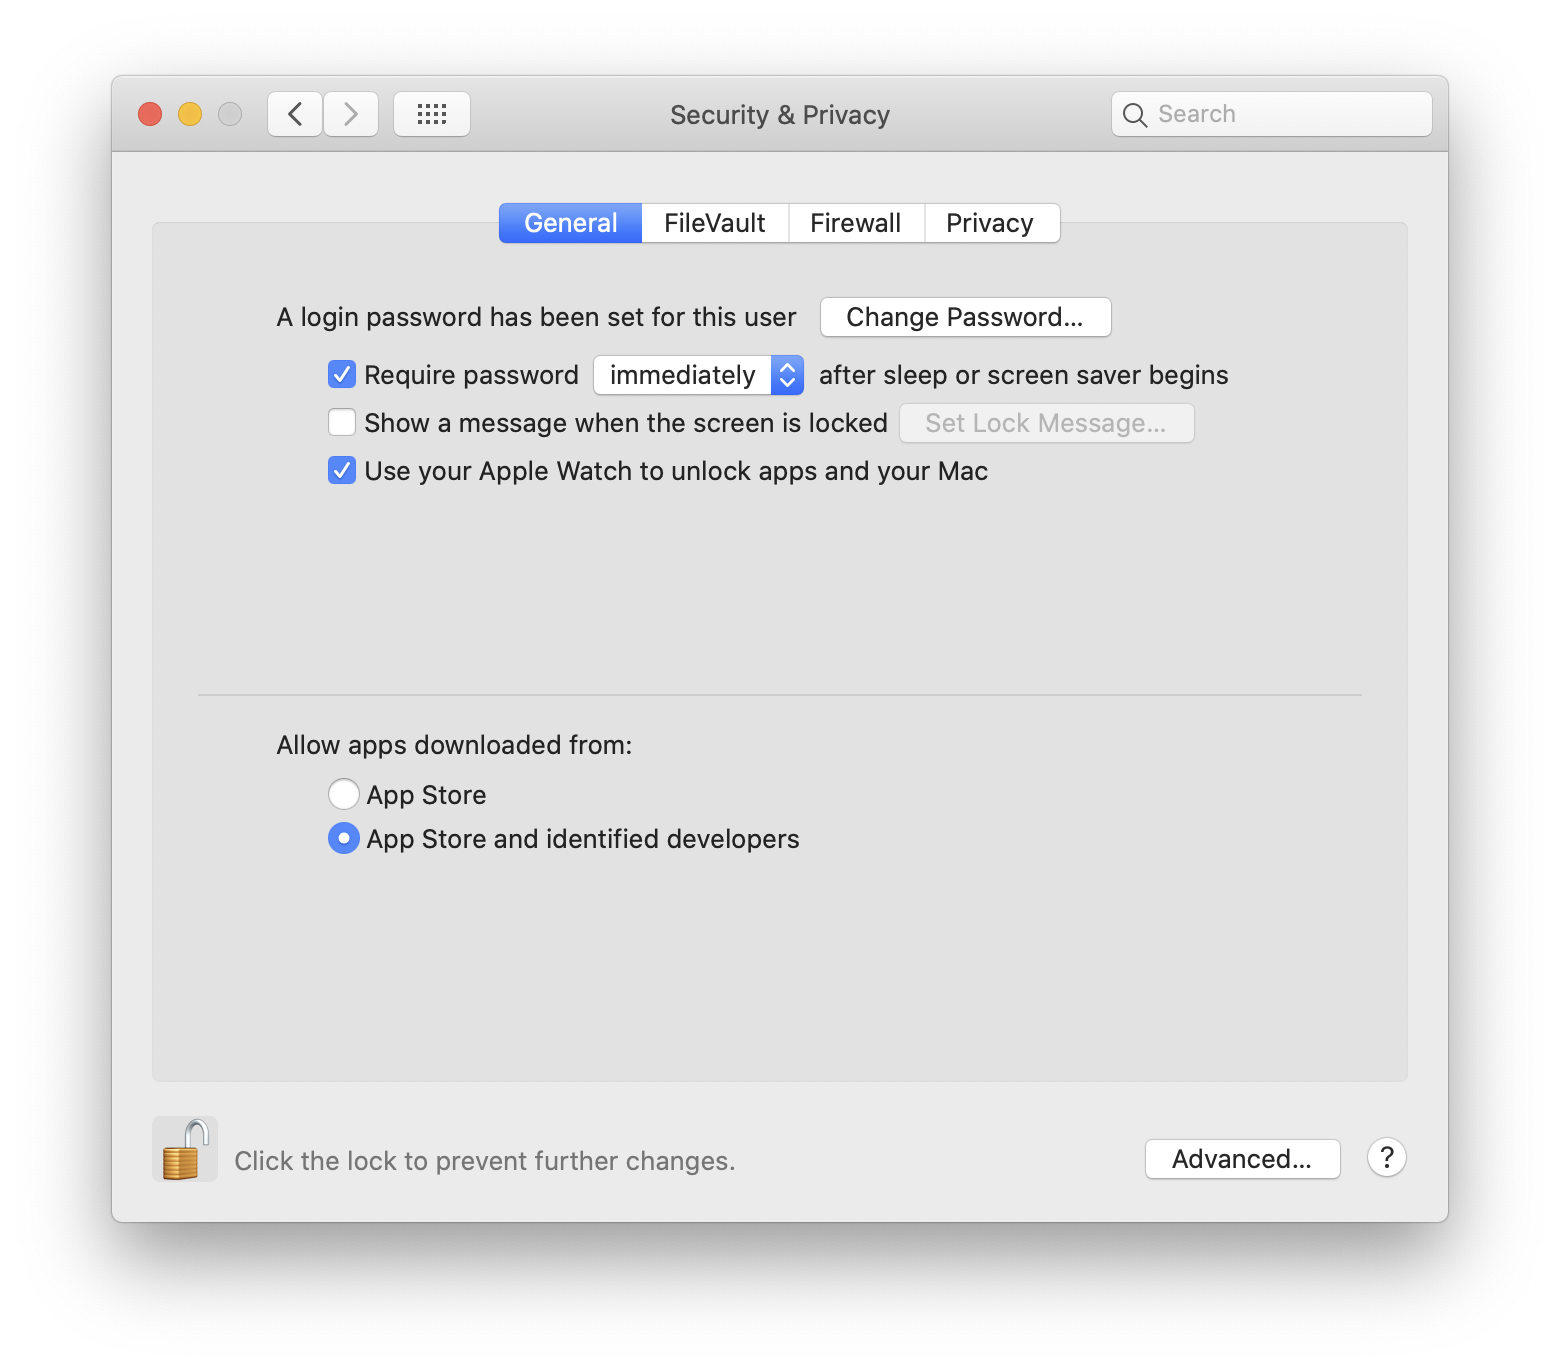 how to update your mac software 10.13